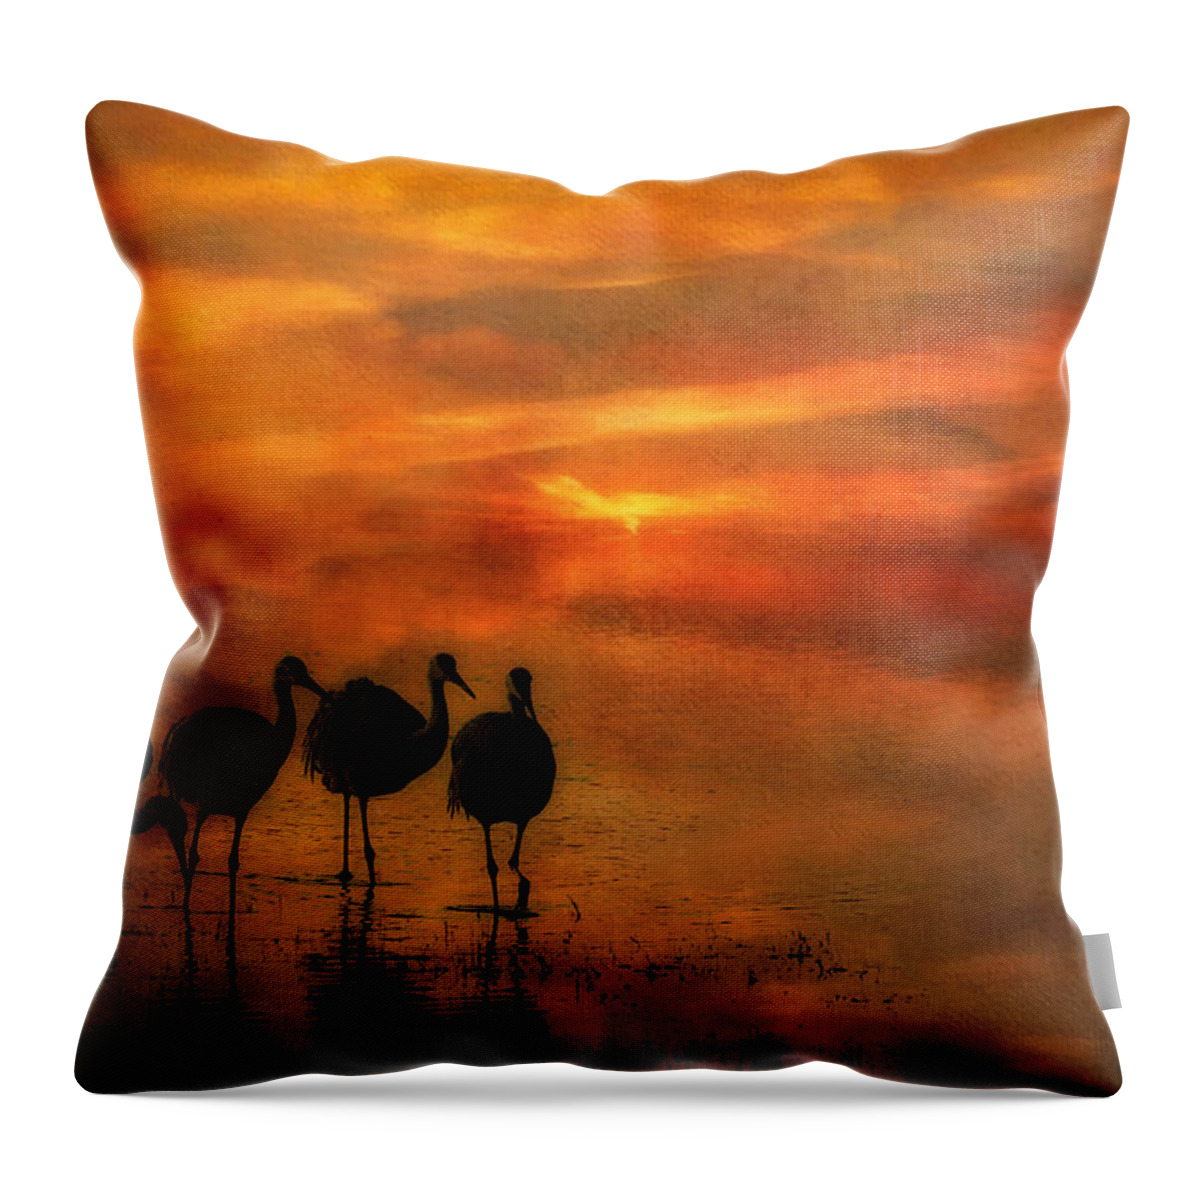 Bosque Sunset Throw Pillow featuring the photograph Bosque Sunset by Priscilla Burgers